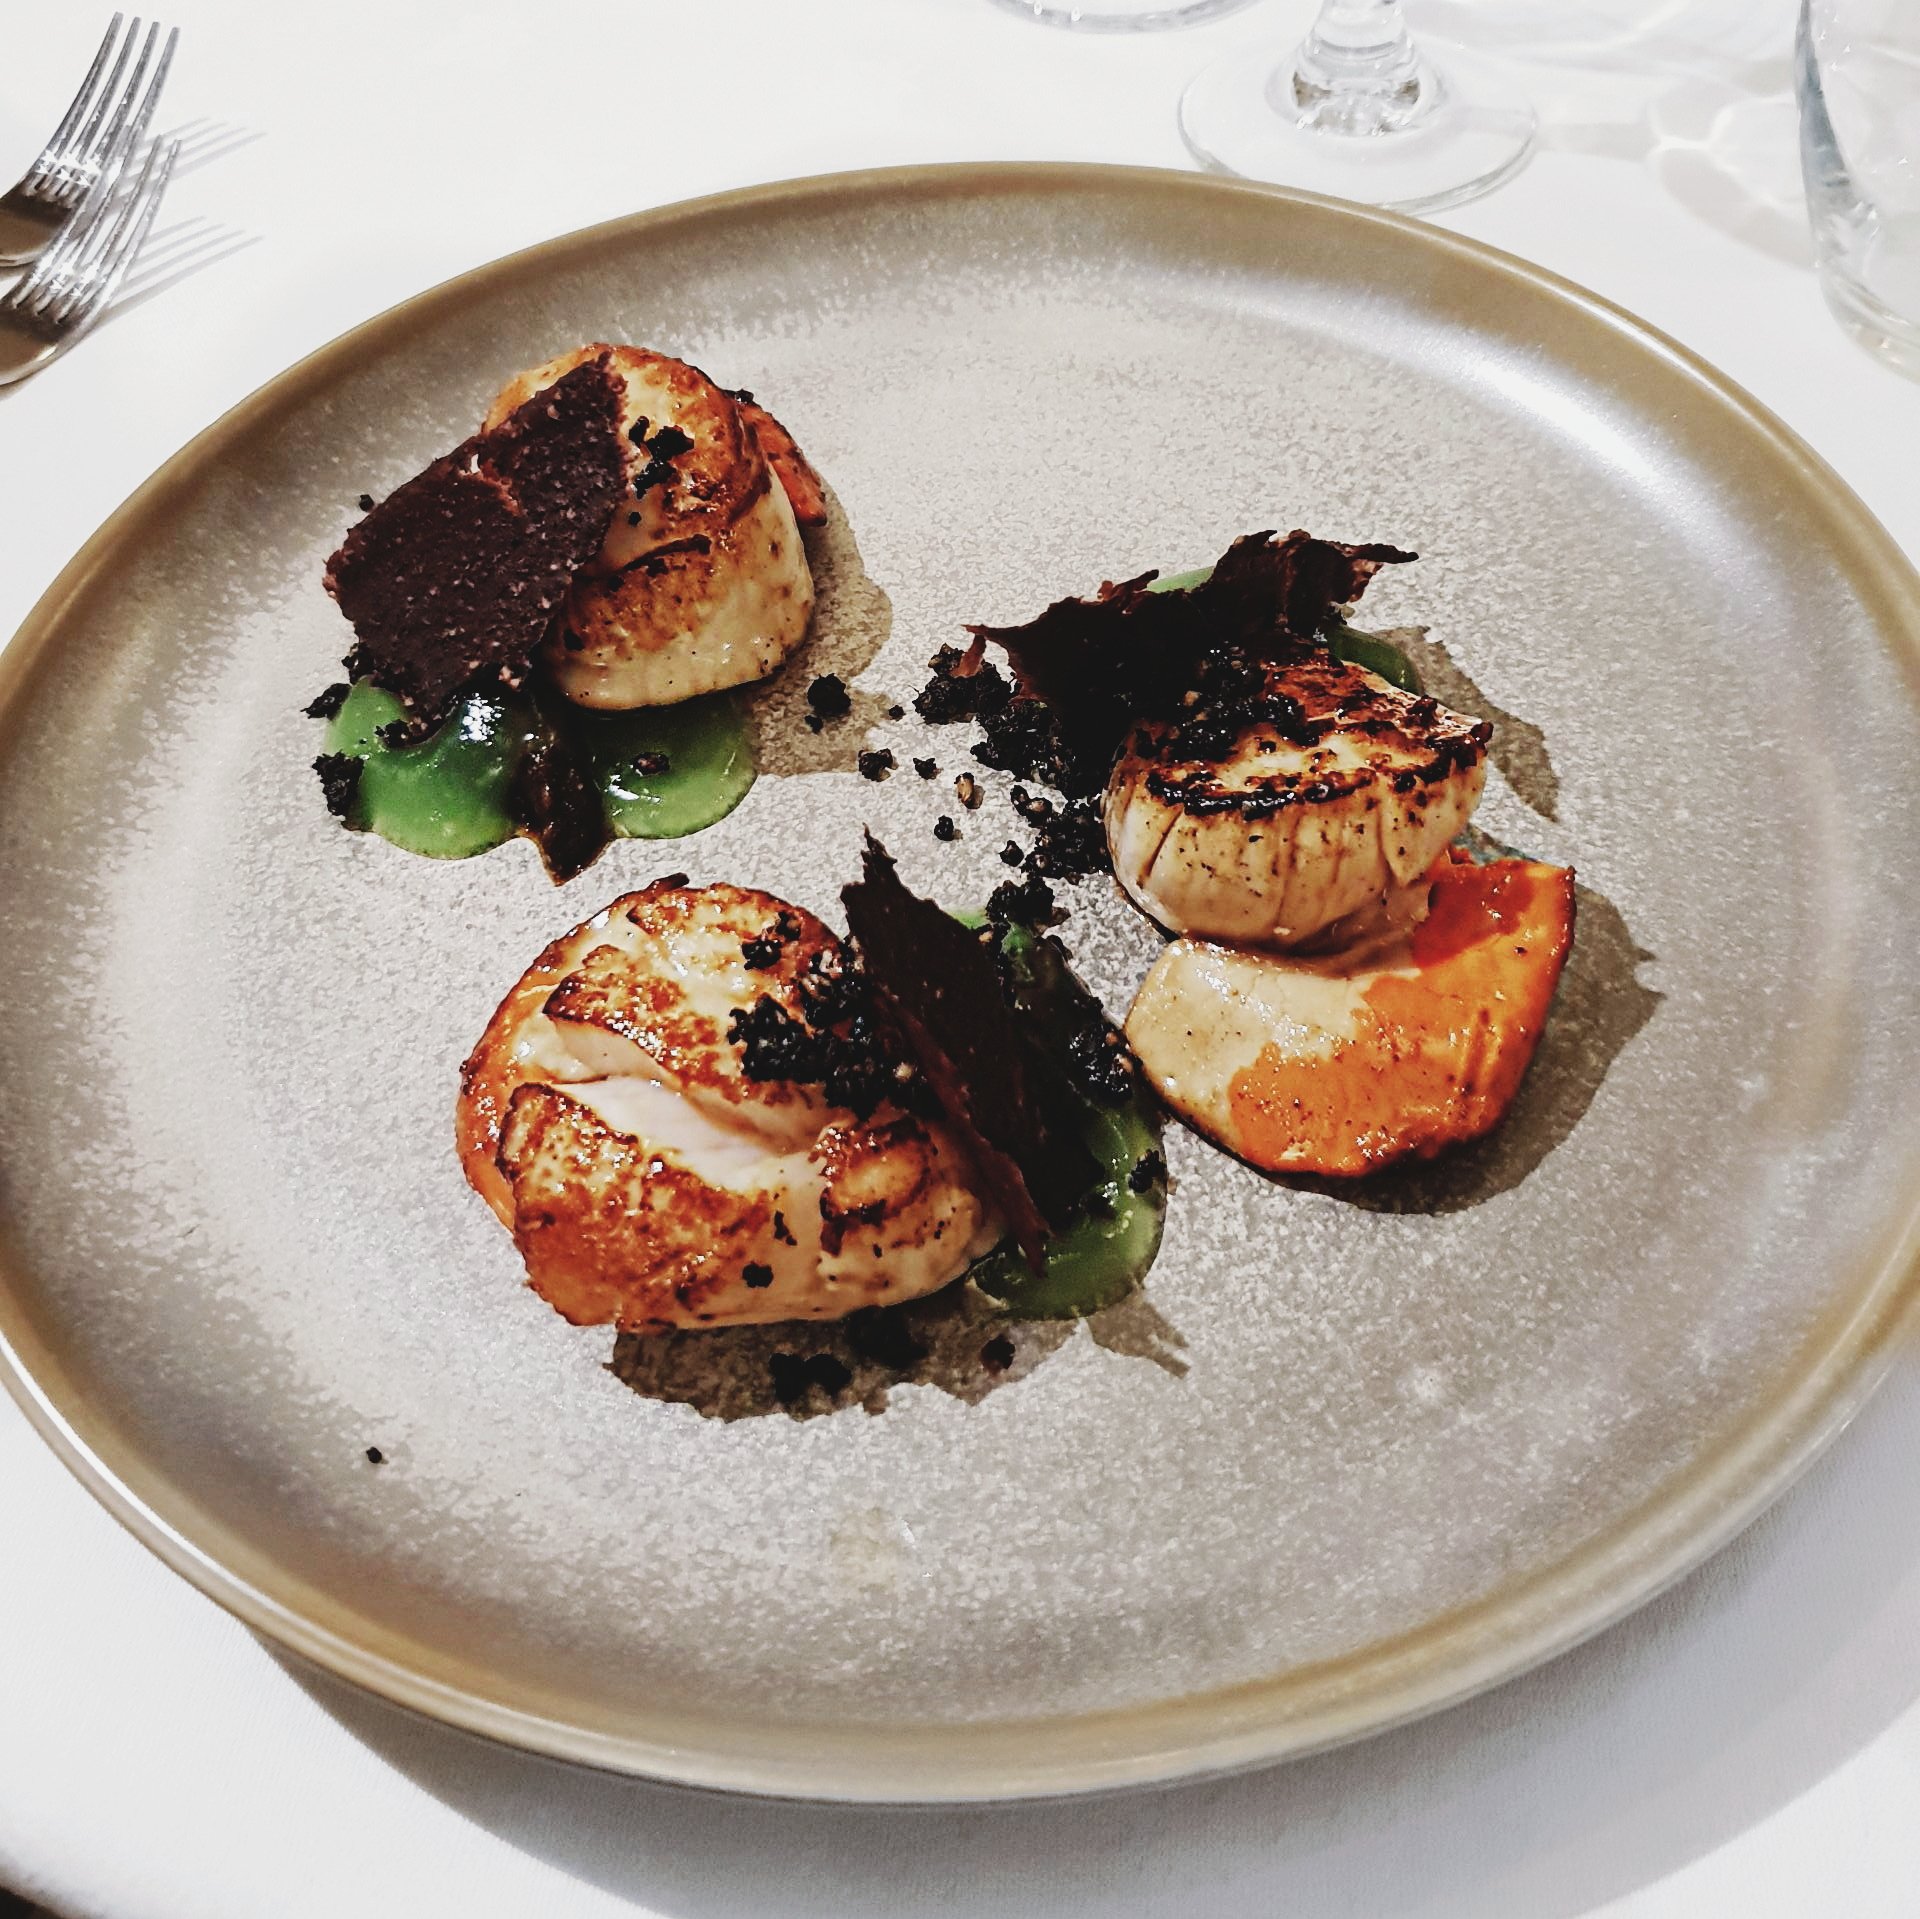 Scallops and Black pudding